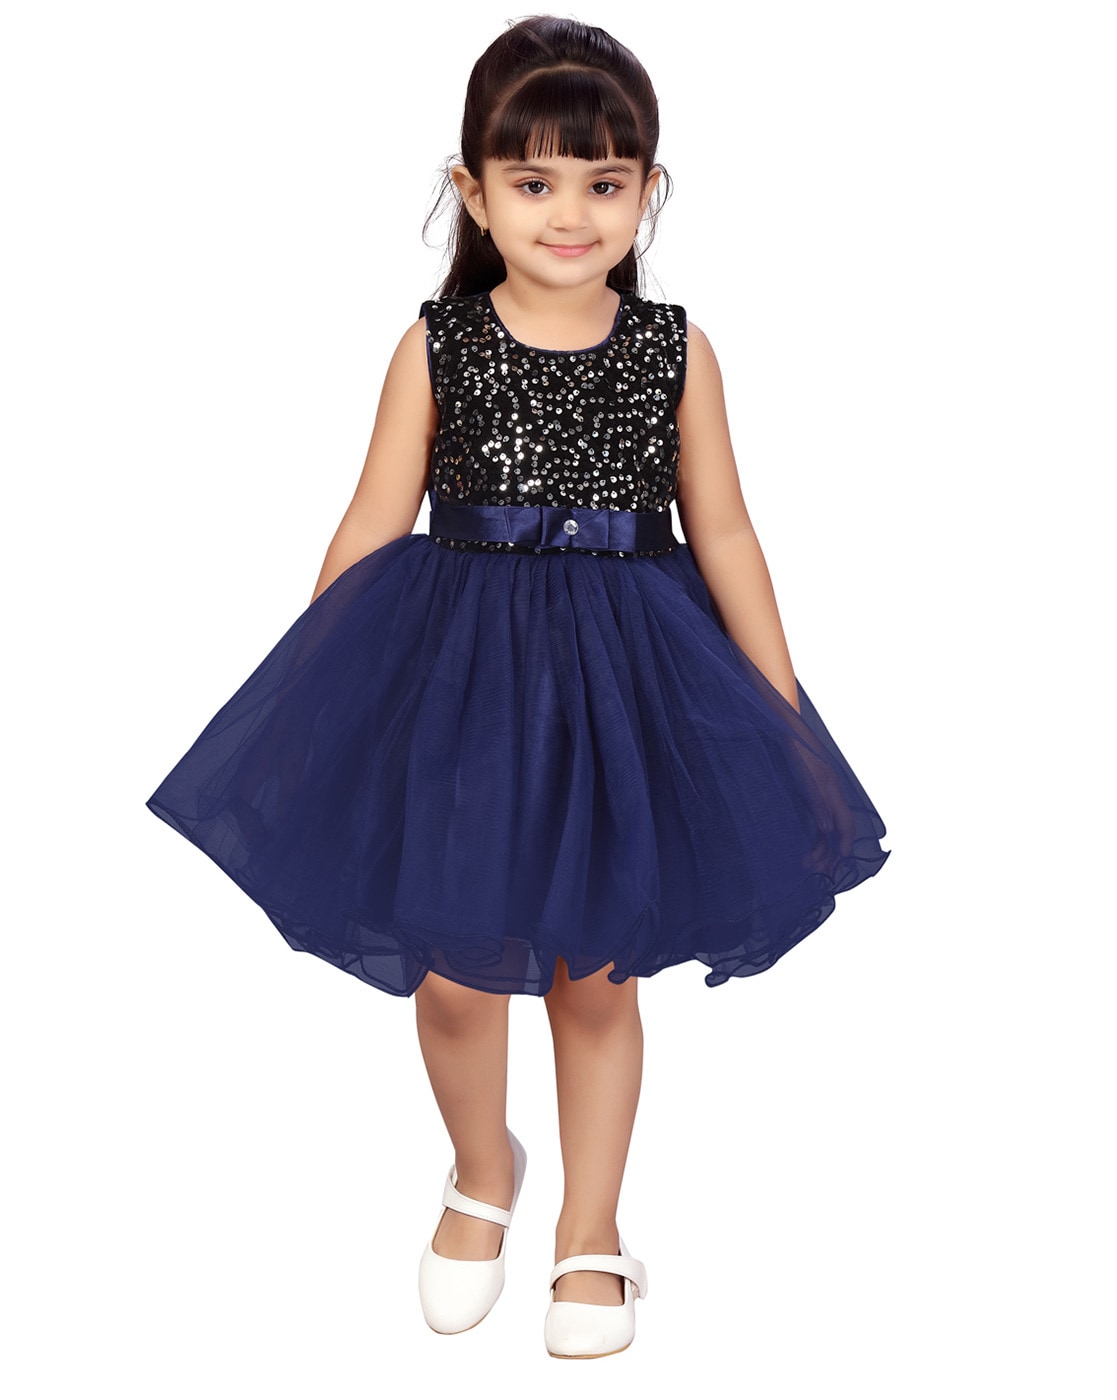 Toddler Girl Dress Floral Kids Ajio Party Wear Dresses For Girls Ruffles  Kid Dress Bow Childrens Clothing 210412 From Cong05, $13.84 | DHgate.Com